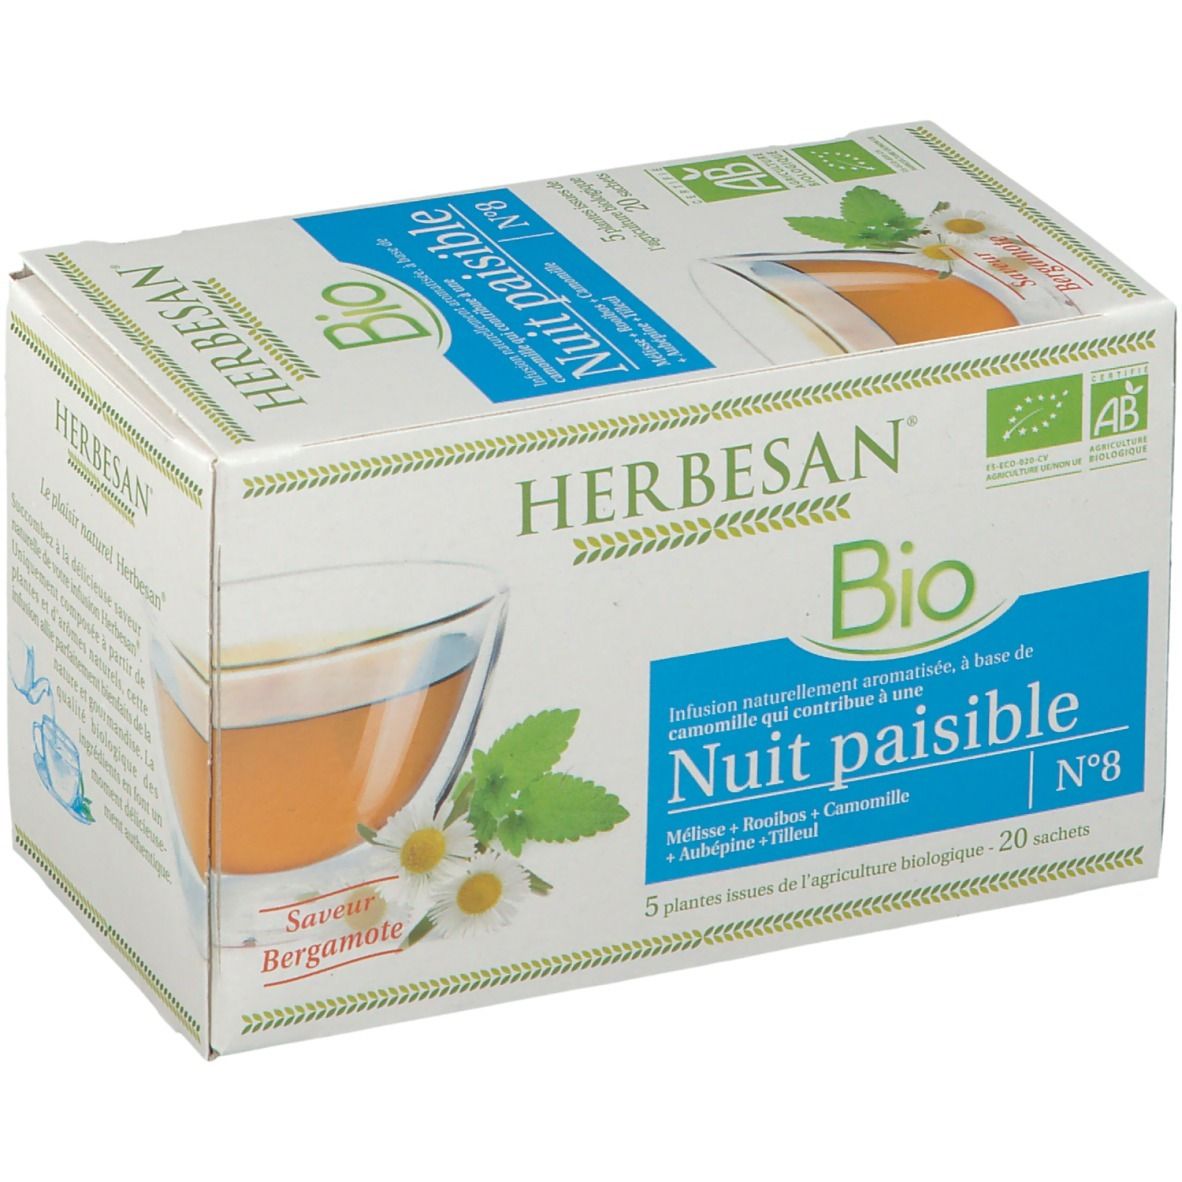 Herbesan Infusion Camomille – Nuit Paisible Bio N° 8